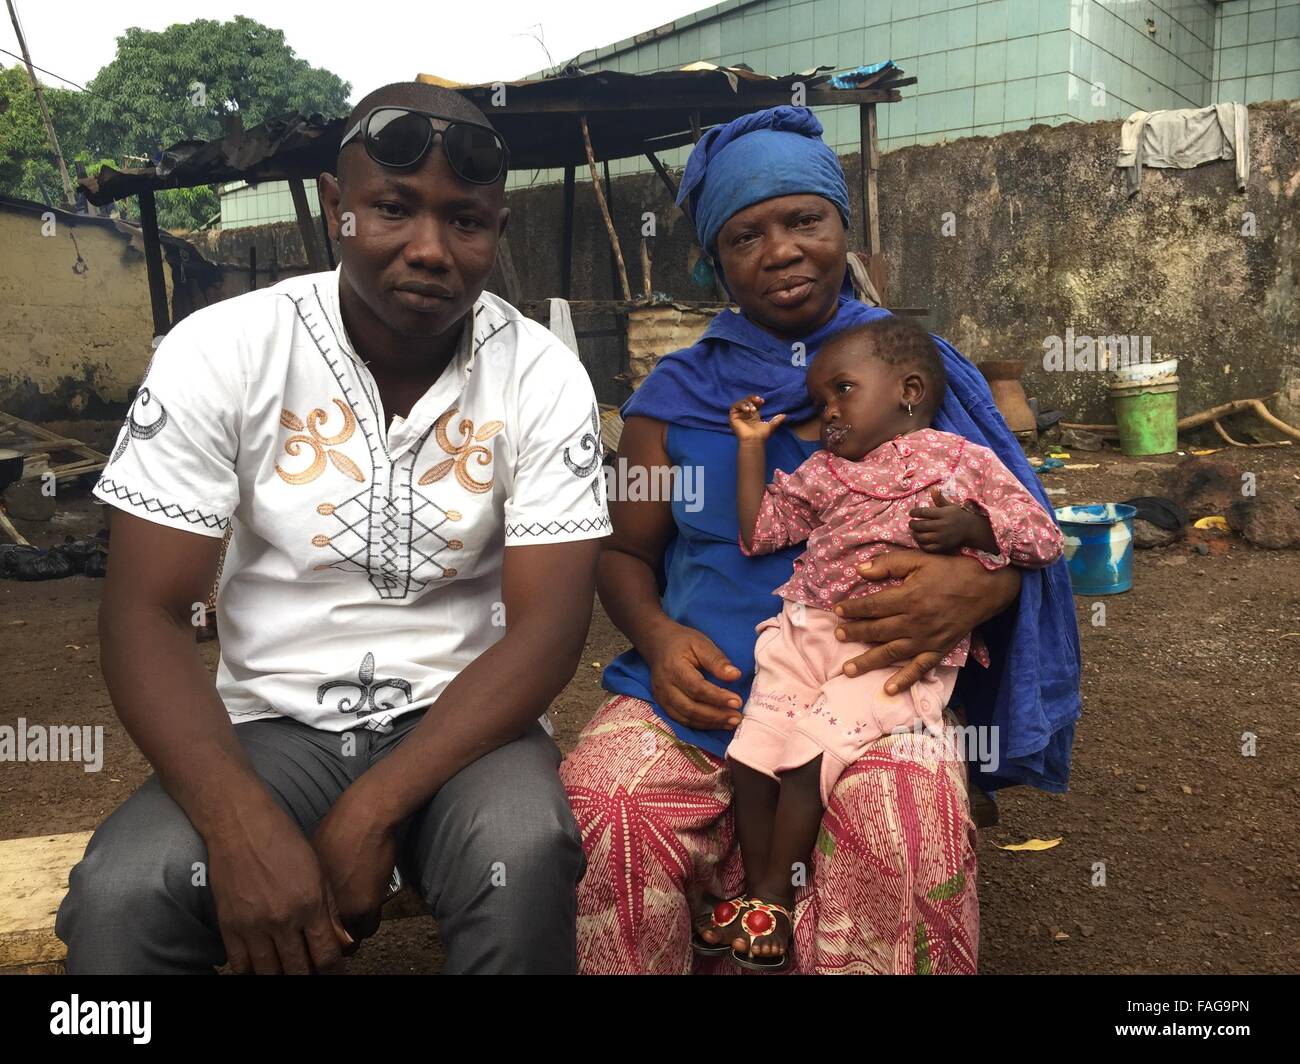 Conakry, Guinea. 12th Nov, 2015. Mohamed Bangoura (L) sits next to his daughter Fatuma and his sister-in-law M'mah Cisse at his farm in Conakry, Guinea, 12 November 2015. The 34-year-old man provides for ten orphans after the Ebola epidemic killed numerous family members. Photo: KRISTIN PALITZA/dpa/Alamy Live News Stock Photo